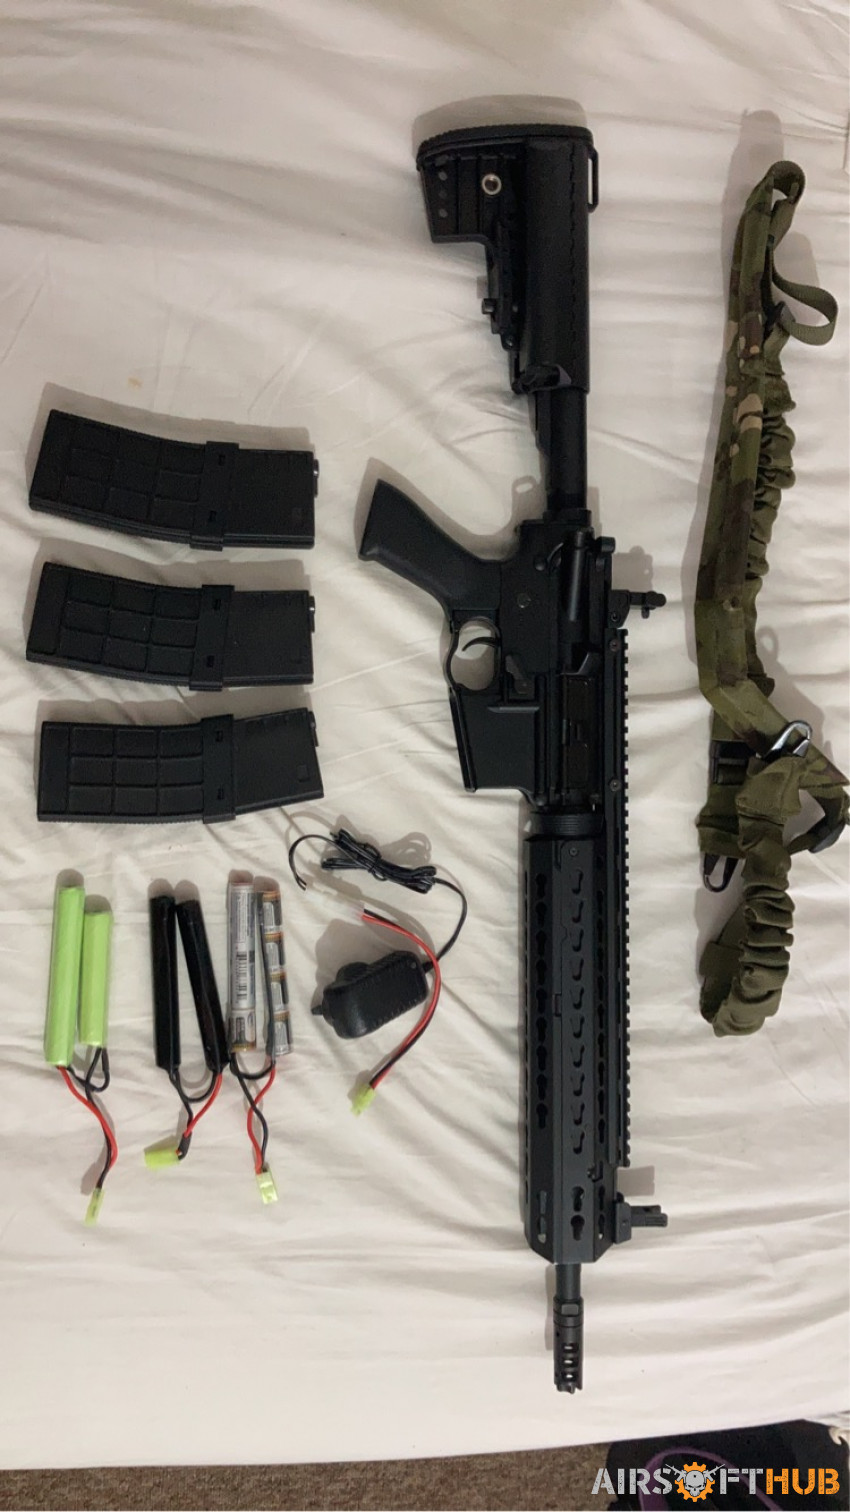 P&J CM.079A - Used airsoft equipment